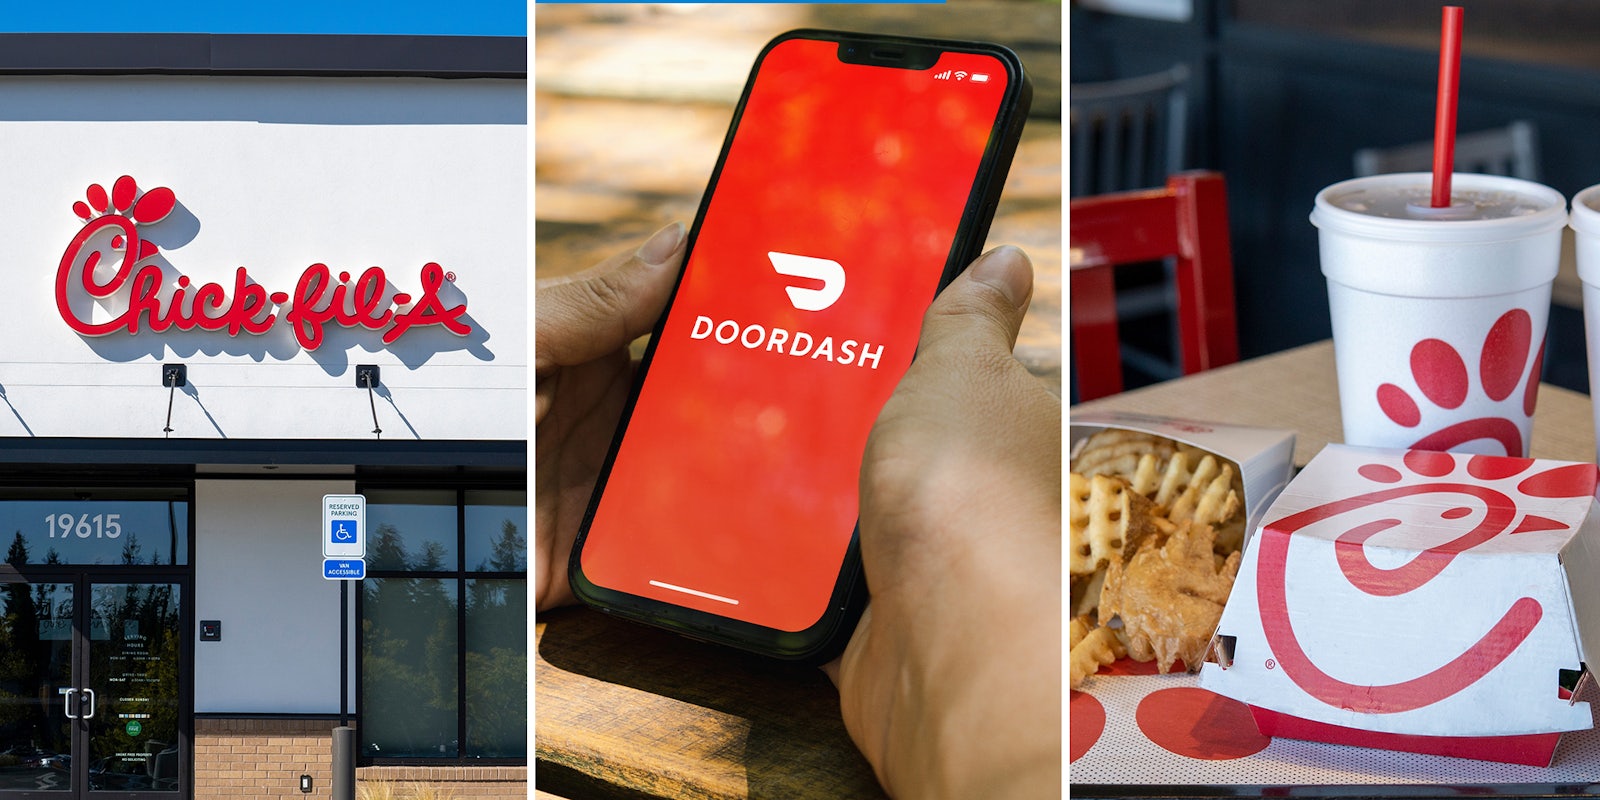 DoorDash customer tries to buy Chick-Fil-A meal